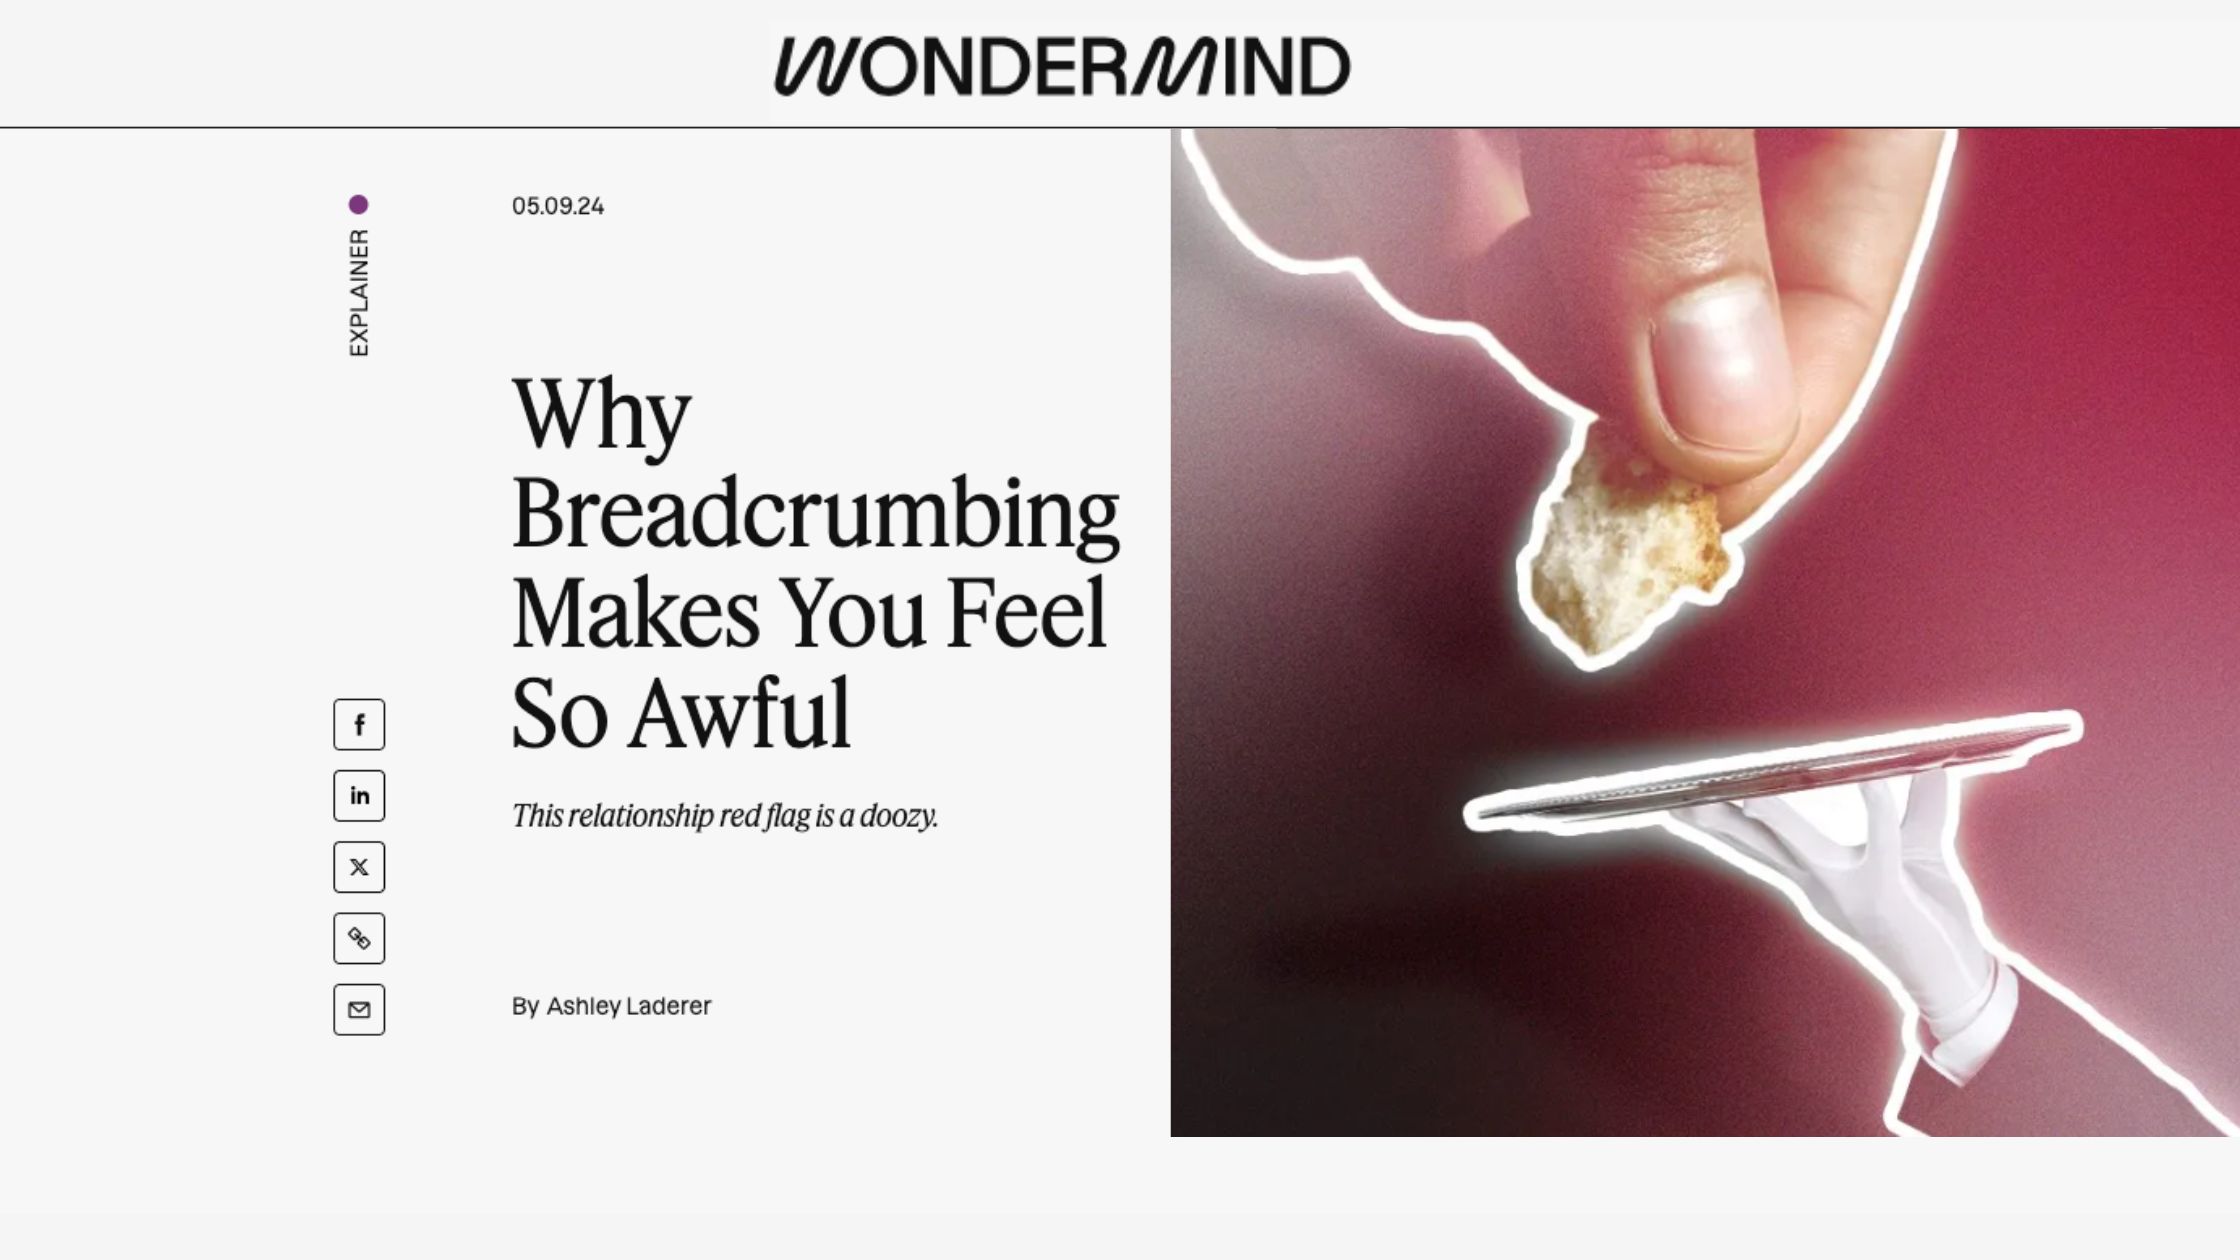 why breadcrumbing makes you feel awful as seen in wondermind